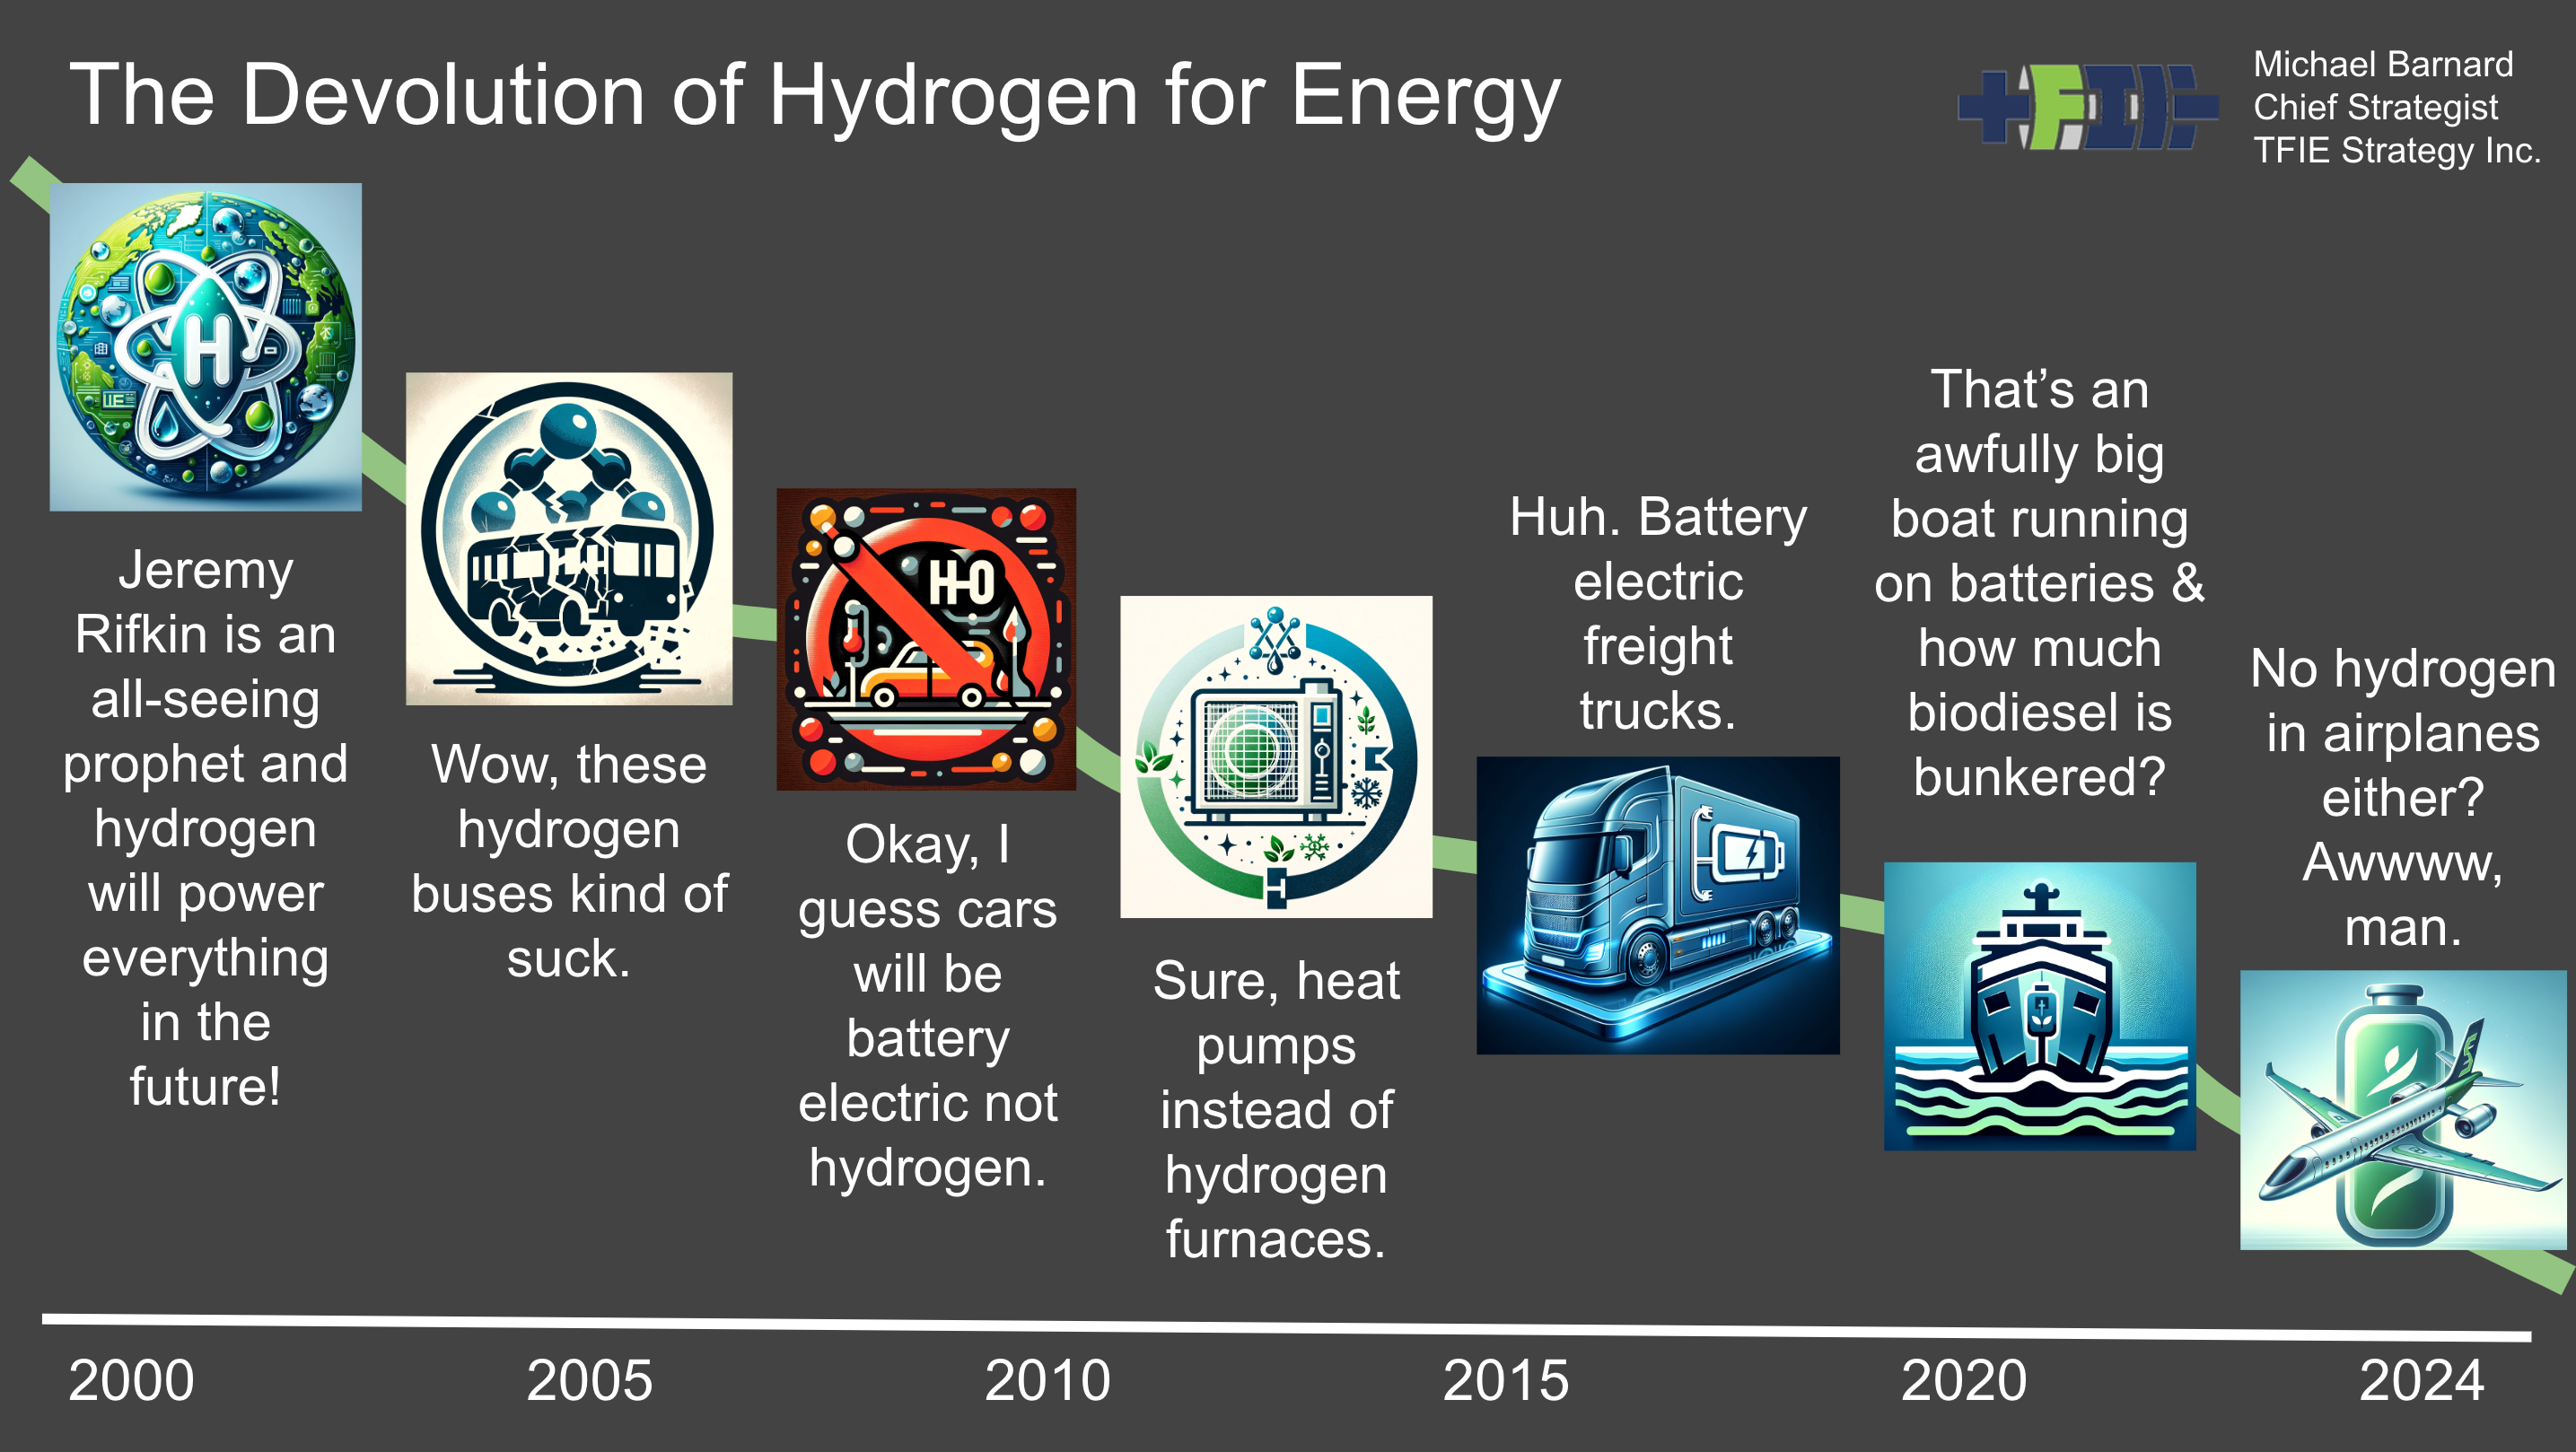 The devolution of hydrogen for energy infographic by Michael Barnard, Chief Strategist, TFIE Strategy Inc.